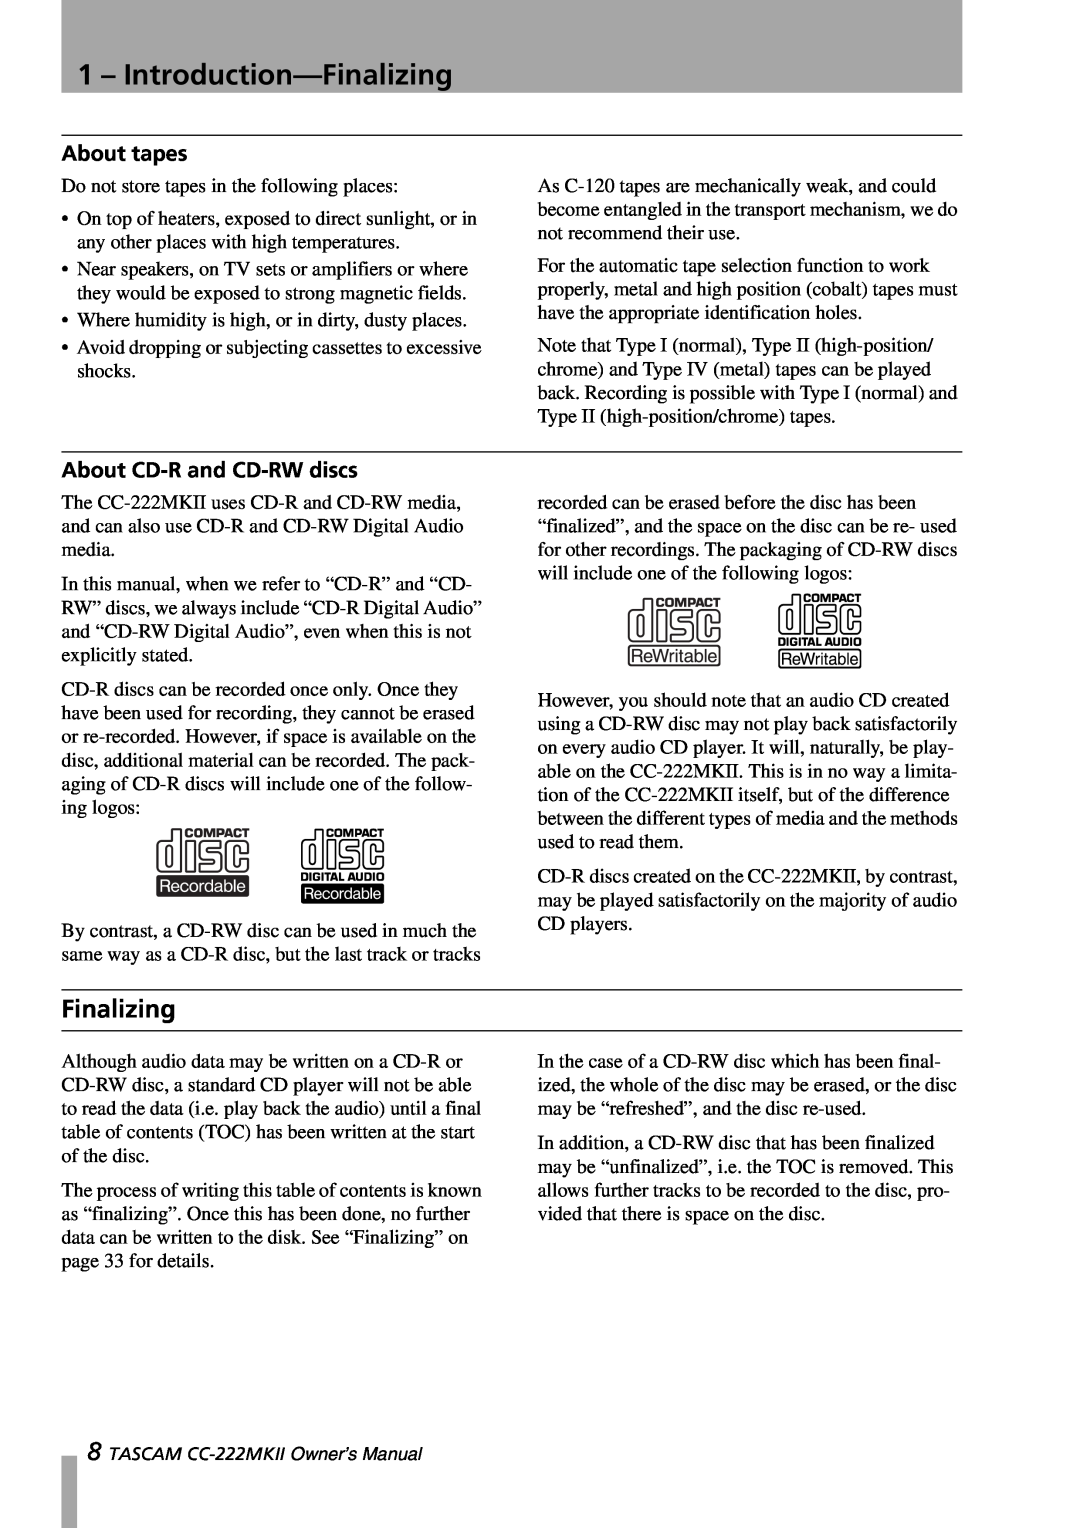 Tascam CC-222MKII owner manual Introduction-Finalizing, About tapes, About CD-Rand CD-RWdiscs 